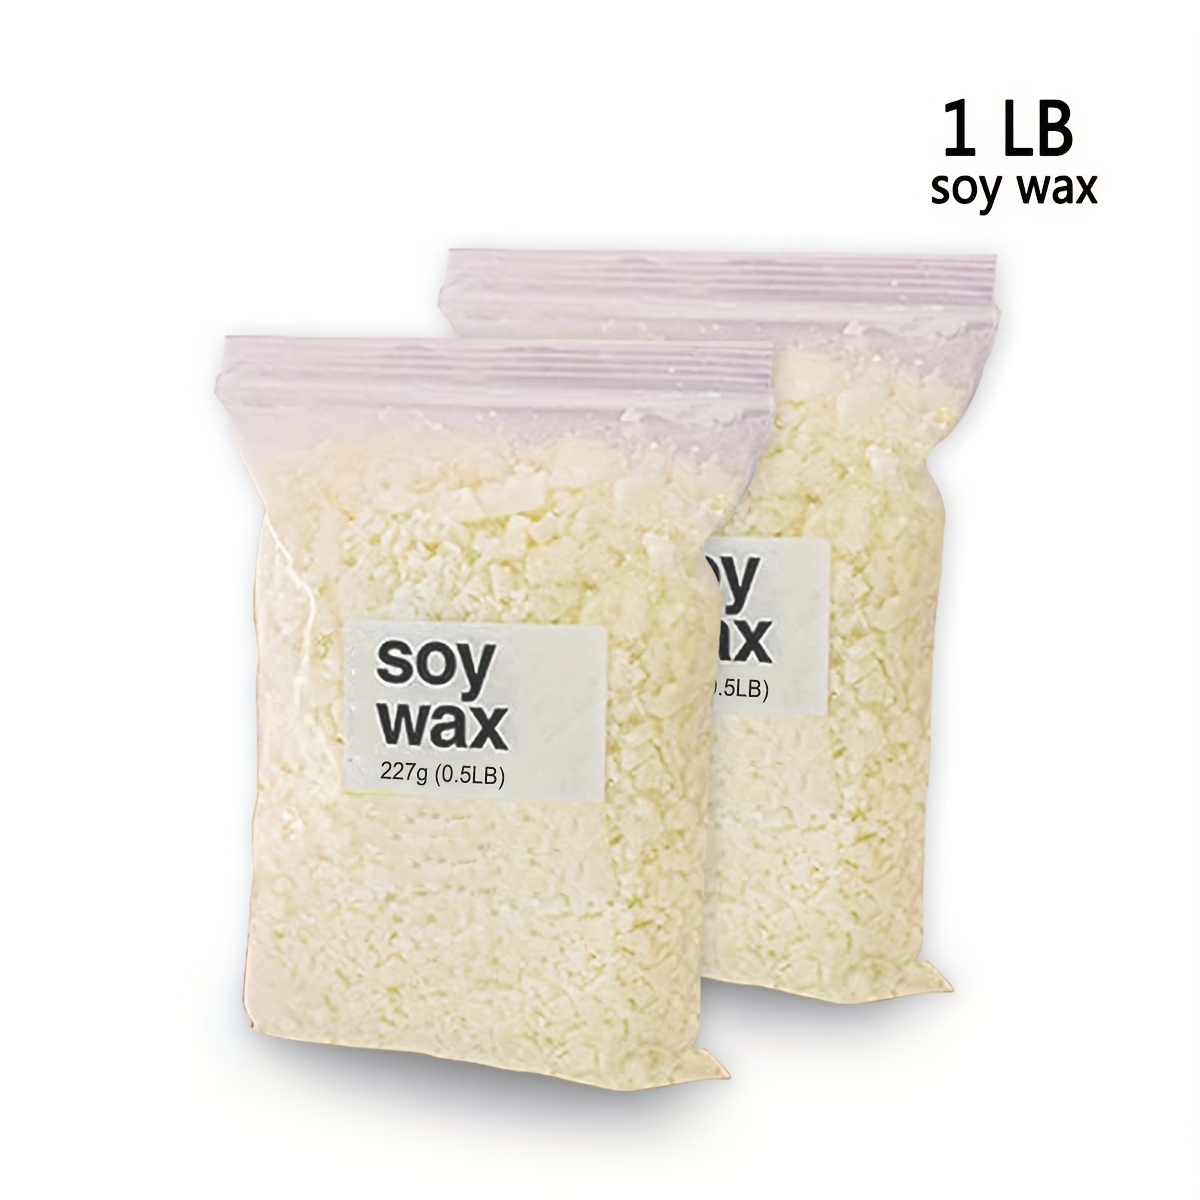 Soy Wax Beeswax Jelly Wax Candle Making Supplies For Scented